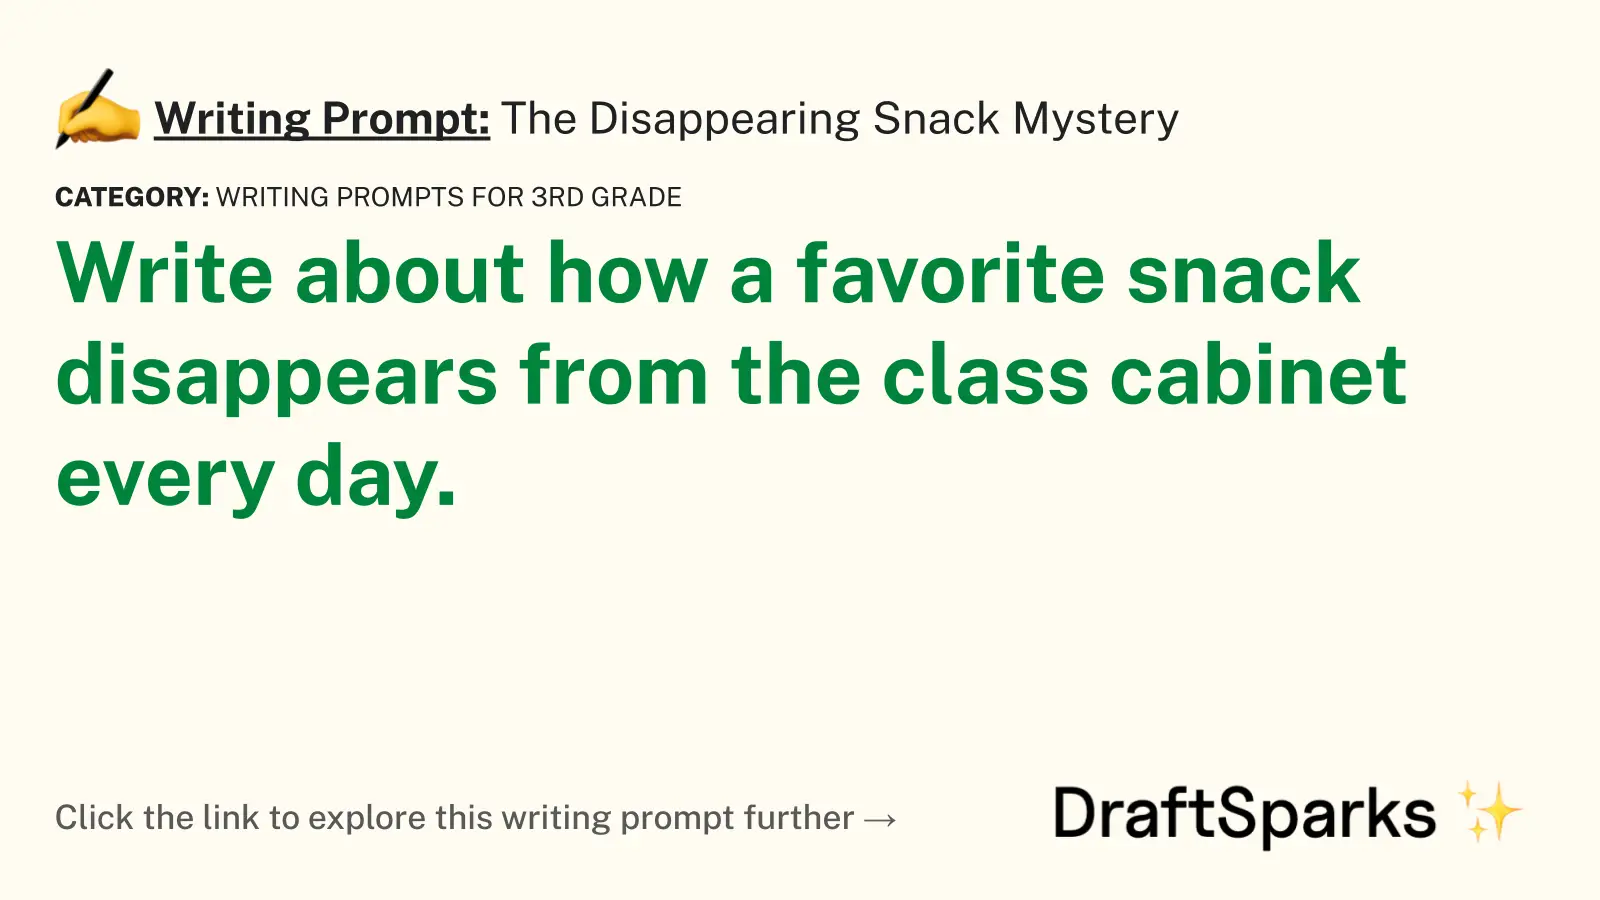 The Disappearing Snack Mystery